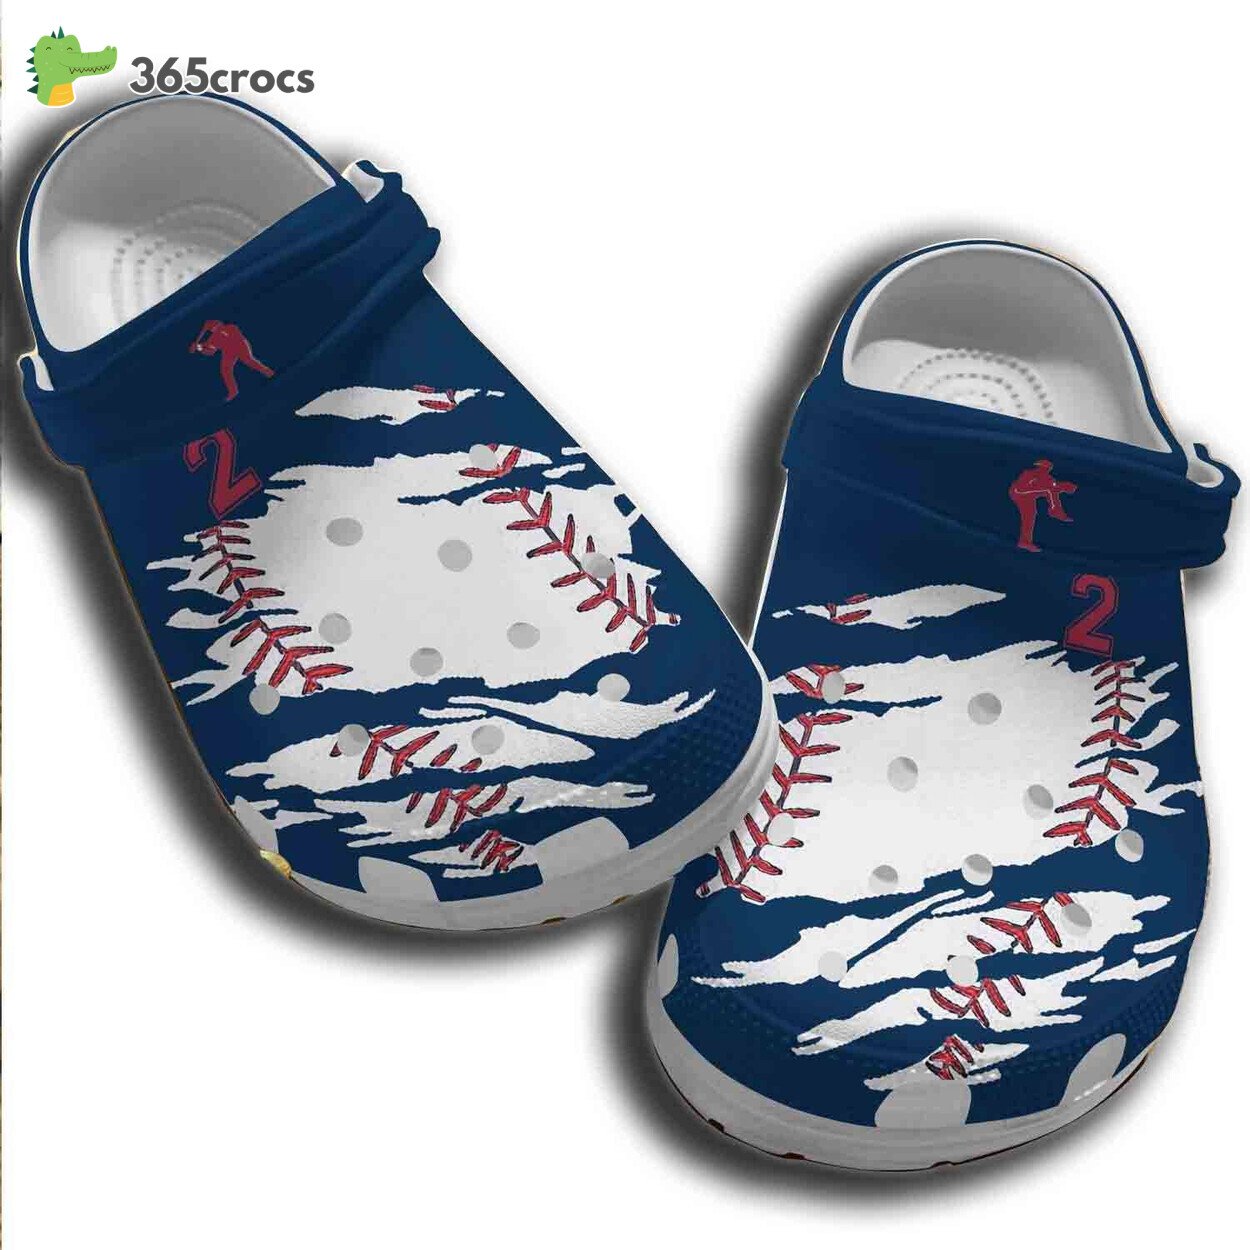 Show Your Game with Personalized Baseball Player Number on Clogs